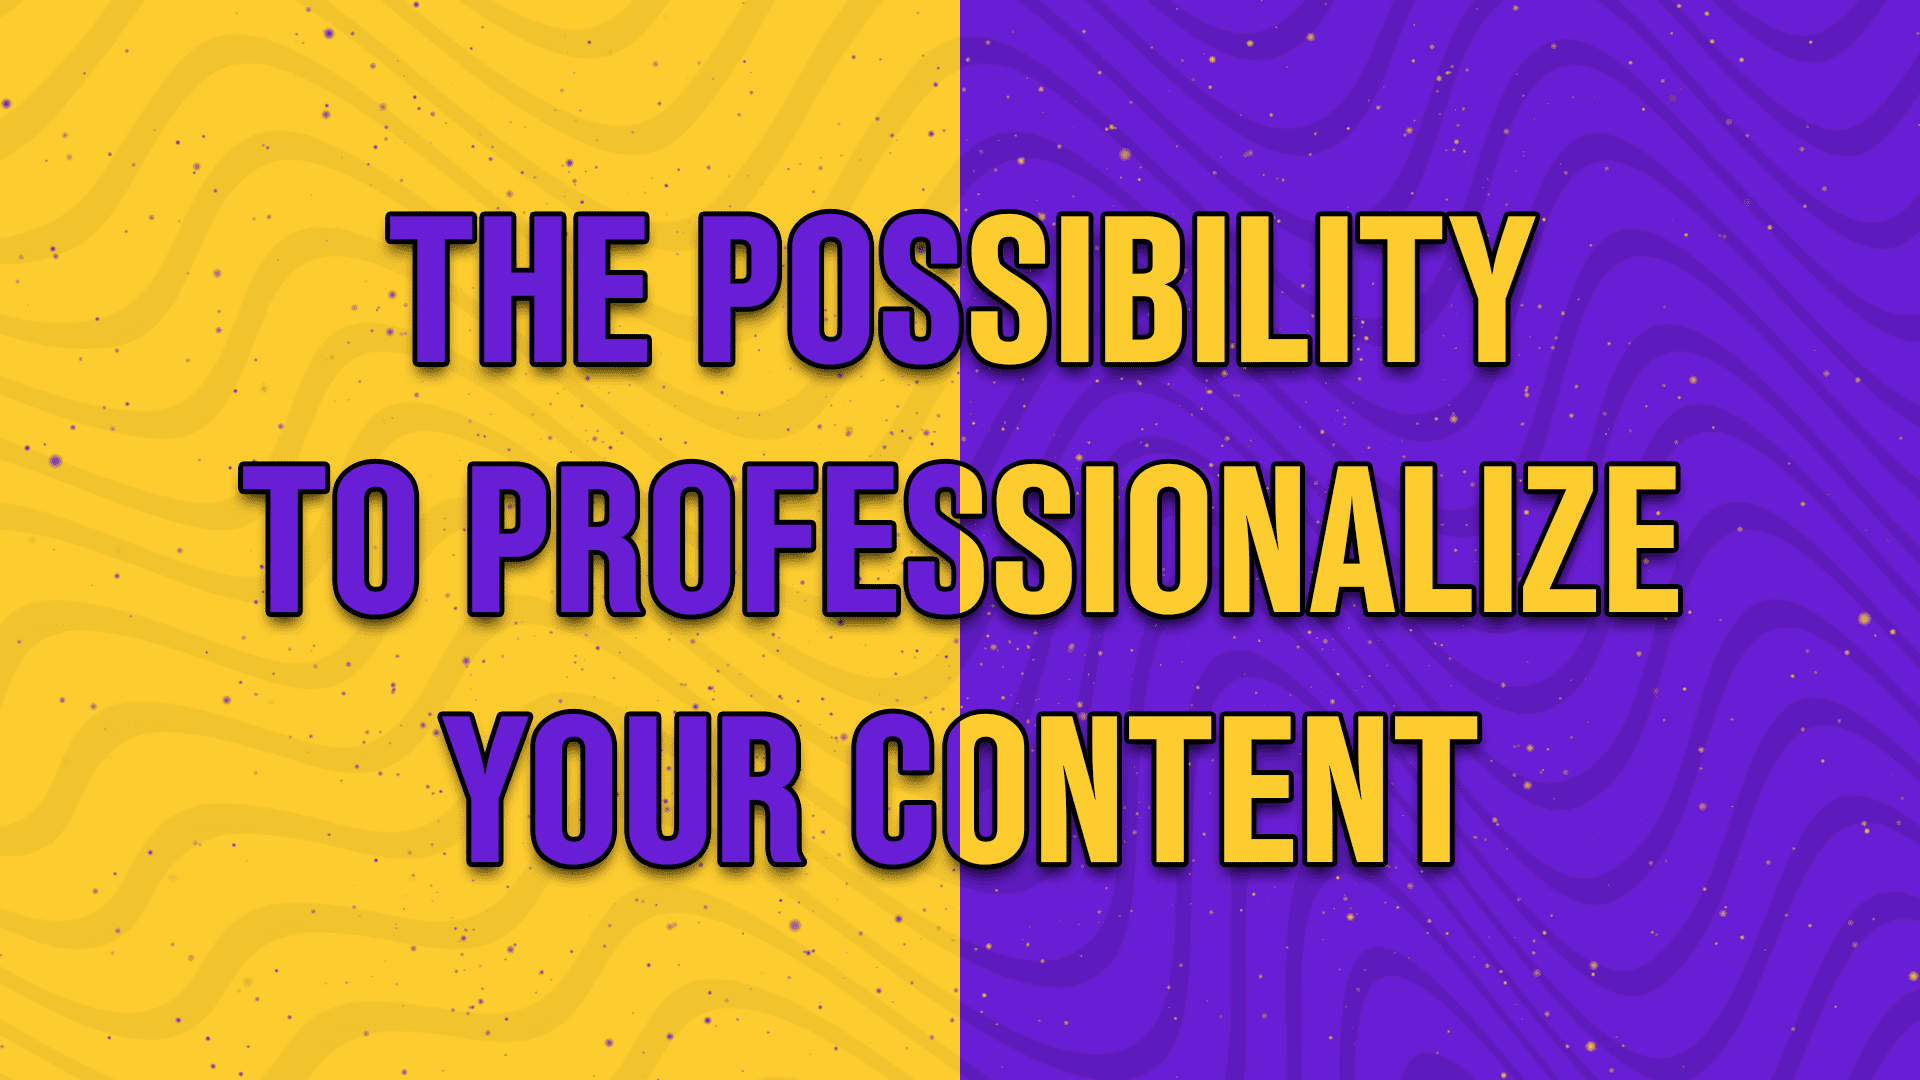 The possibility to professionnalize your content - StreamBee